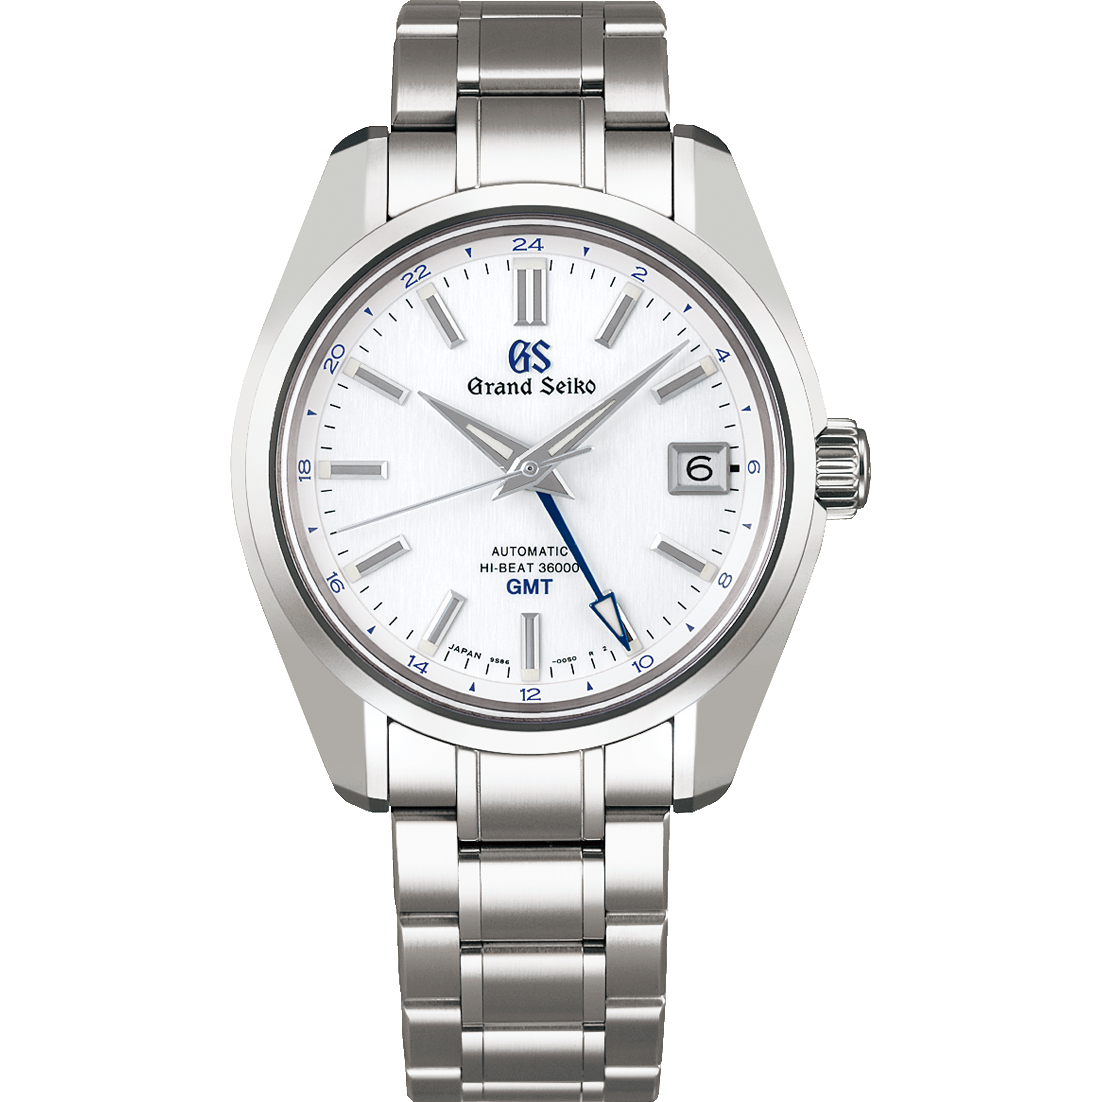 Heritage Collection Mechanical Hi-Beat 36000 Gmt 44Gs 55Th Anniversary Limited Edition Watch SBGJ255G Grand Seiko